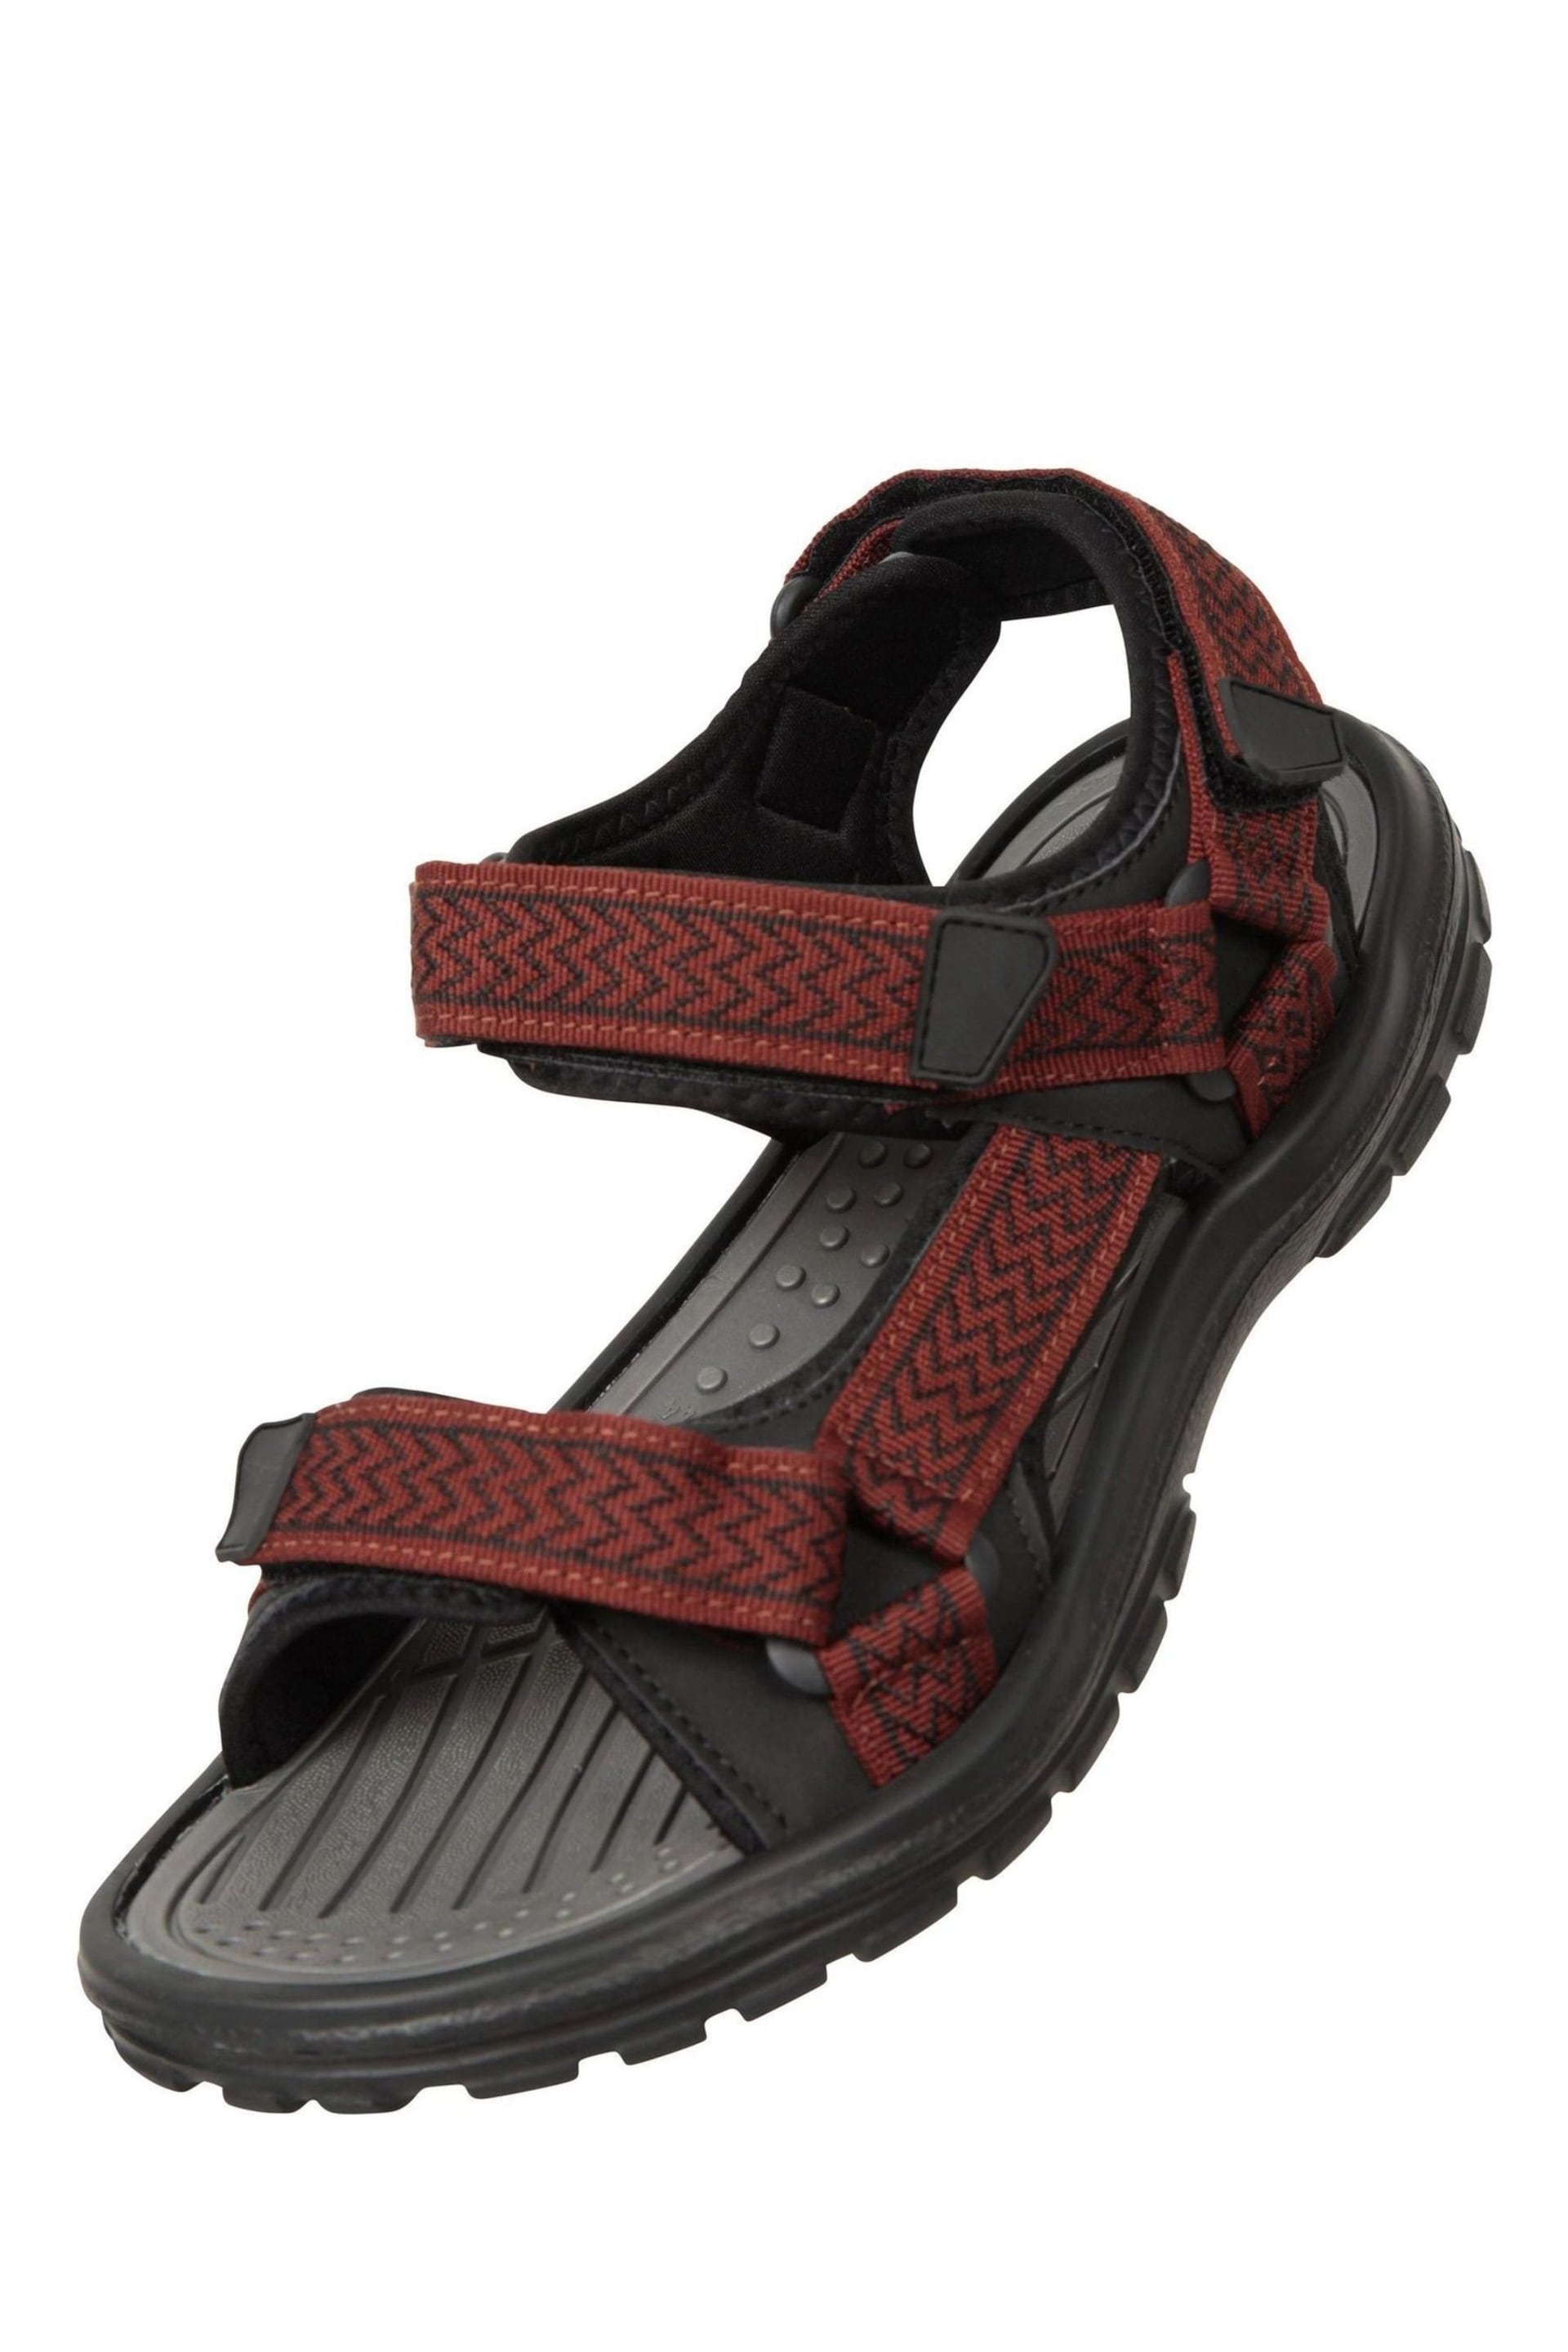 Mountain Warehouse Brown Crete Mens Sandals - Image 6 of 6